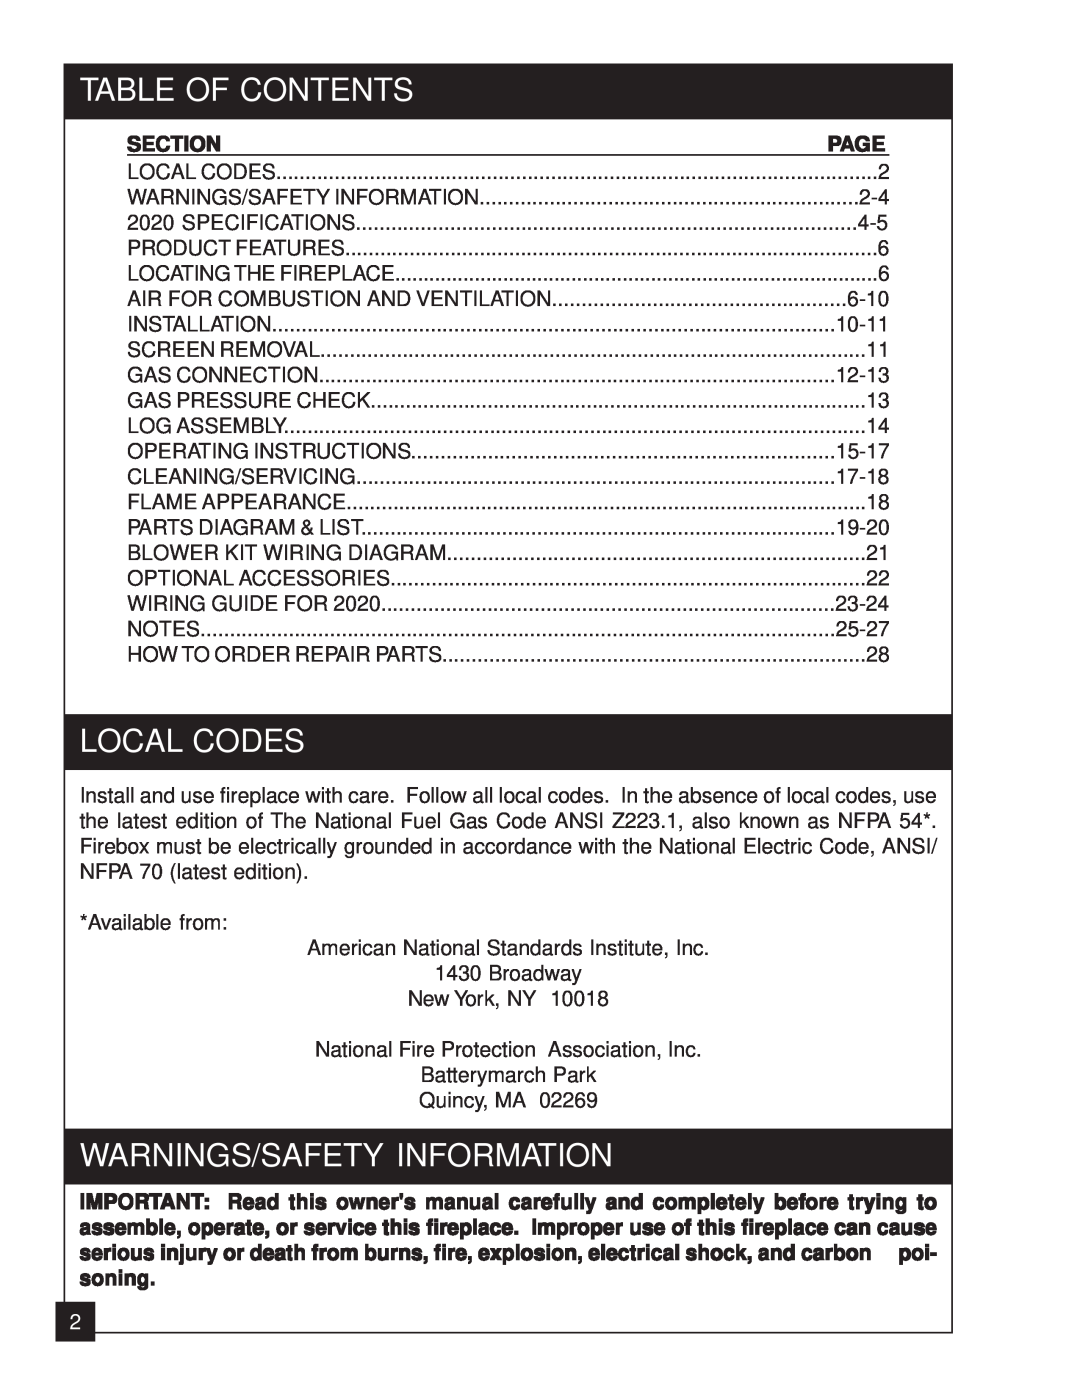 United States Stove 2020N manual Table Of Contents, Local Codes, Warnings/Safety Information, Section 